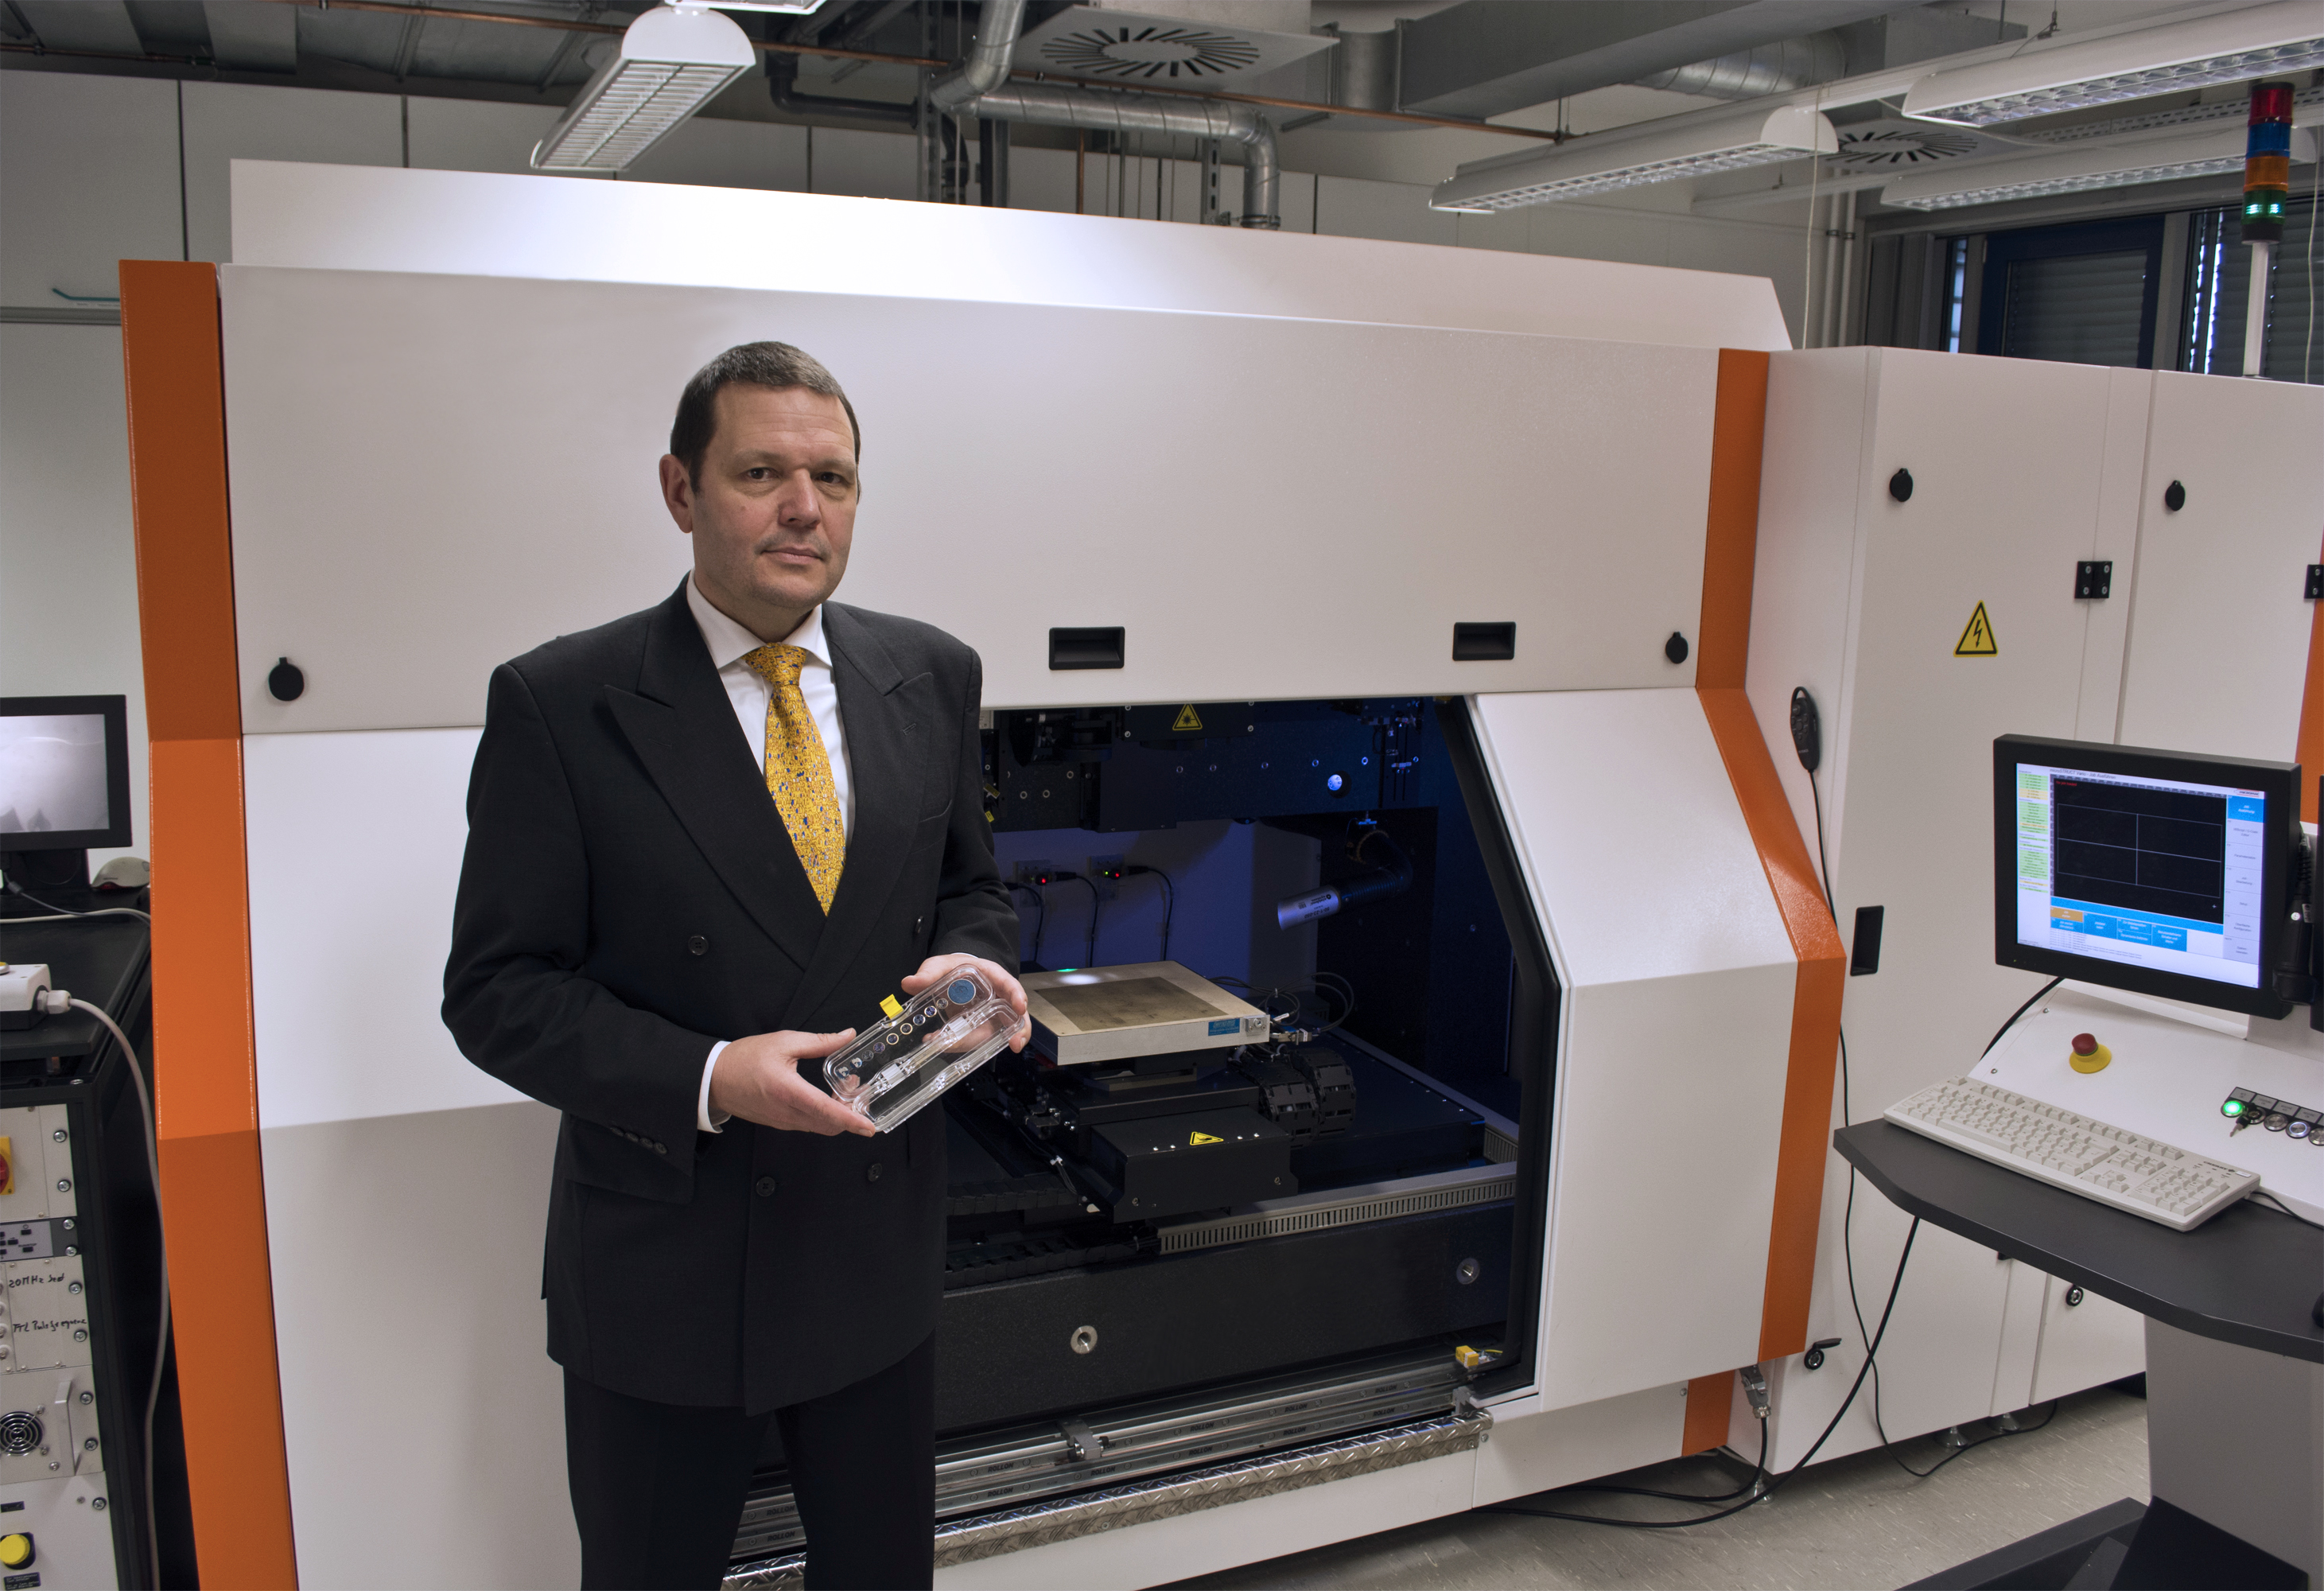 Dr. Udo Klotzbach heads the newly established IWS business unit “Microtechnology“